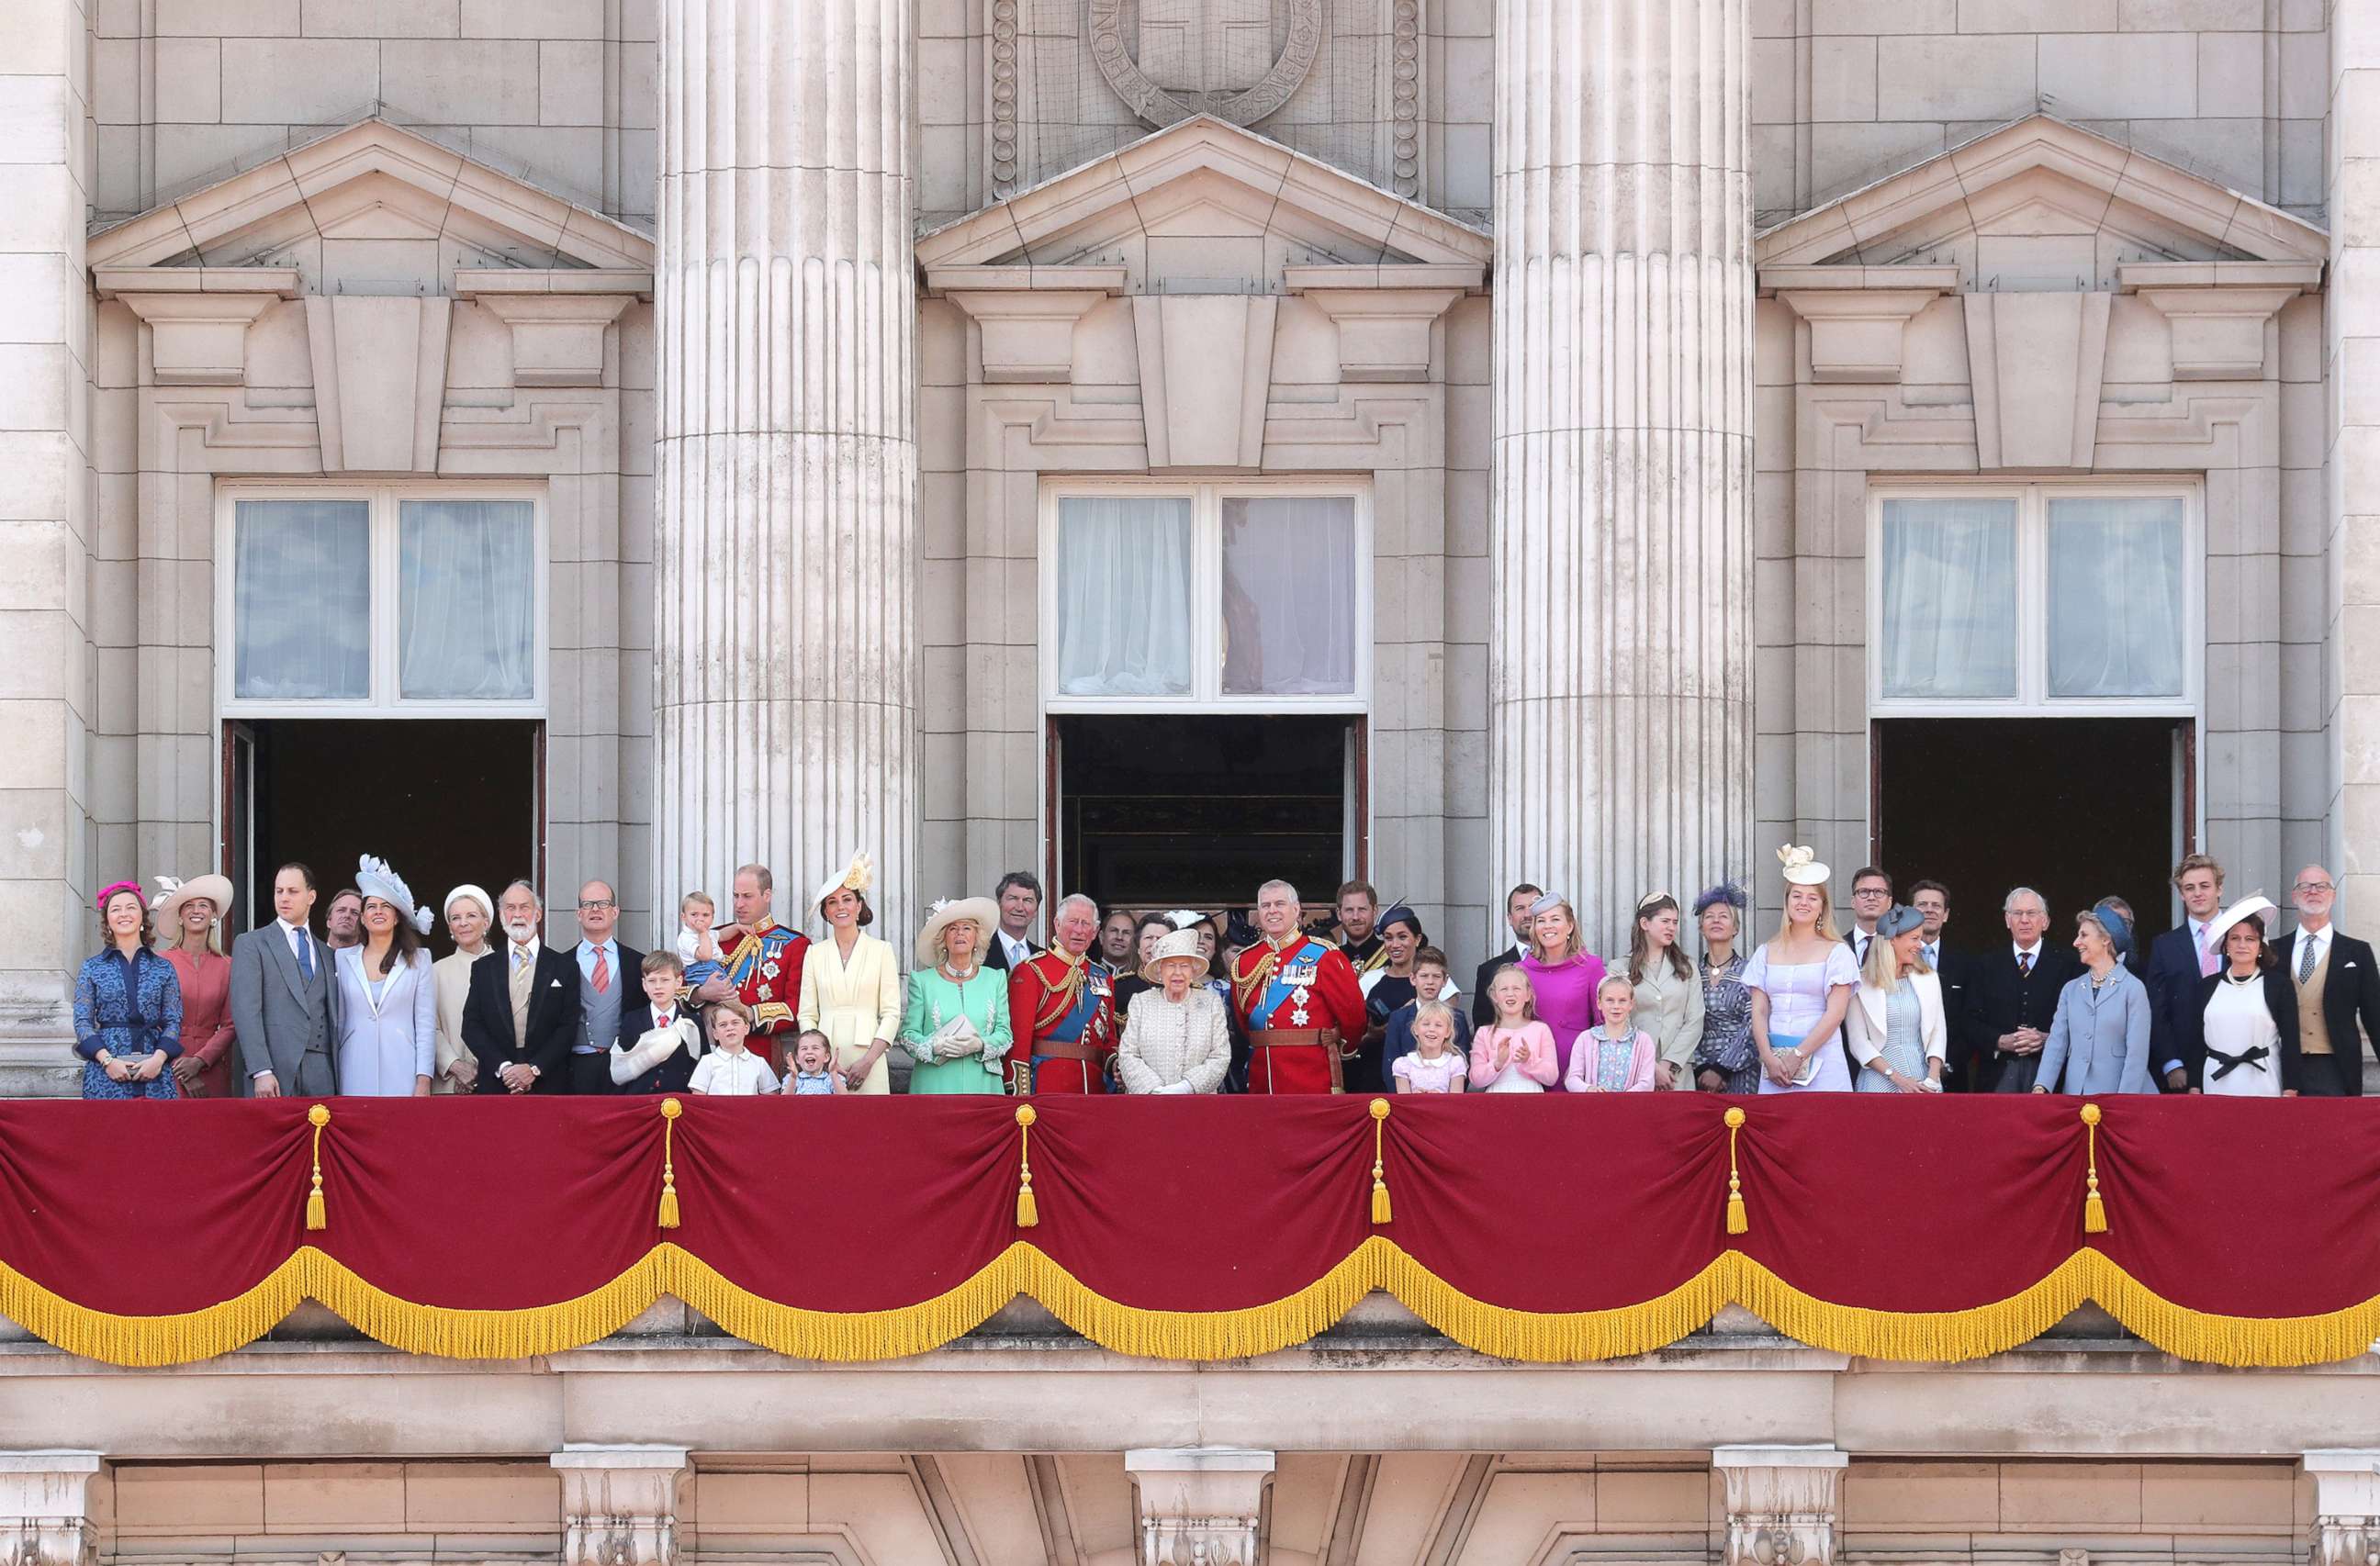 PHOTO: Members of the Royal Family stand on the balcony of Buckingham Palace to watch a fly-past of aircraft by the Royal Air Force during Trooping The Colour, the Queen's annual birthday parade, on June 8, 2019, in London.